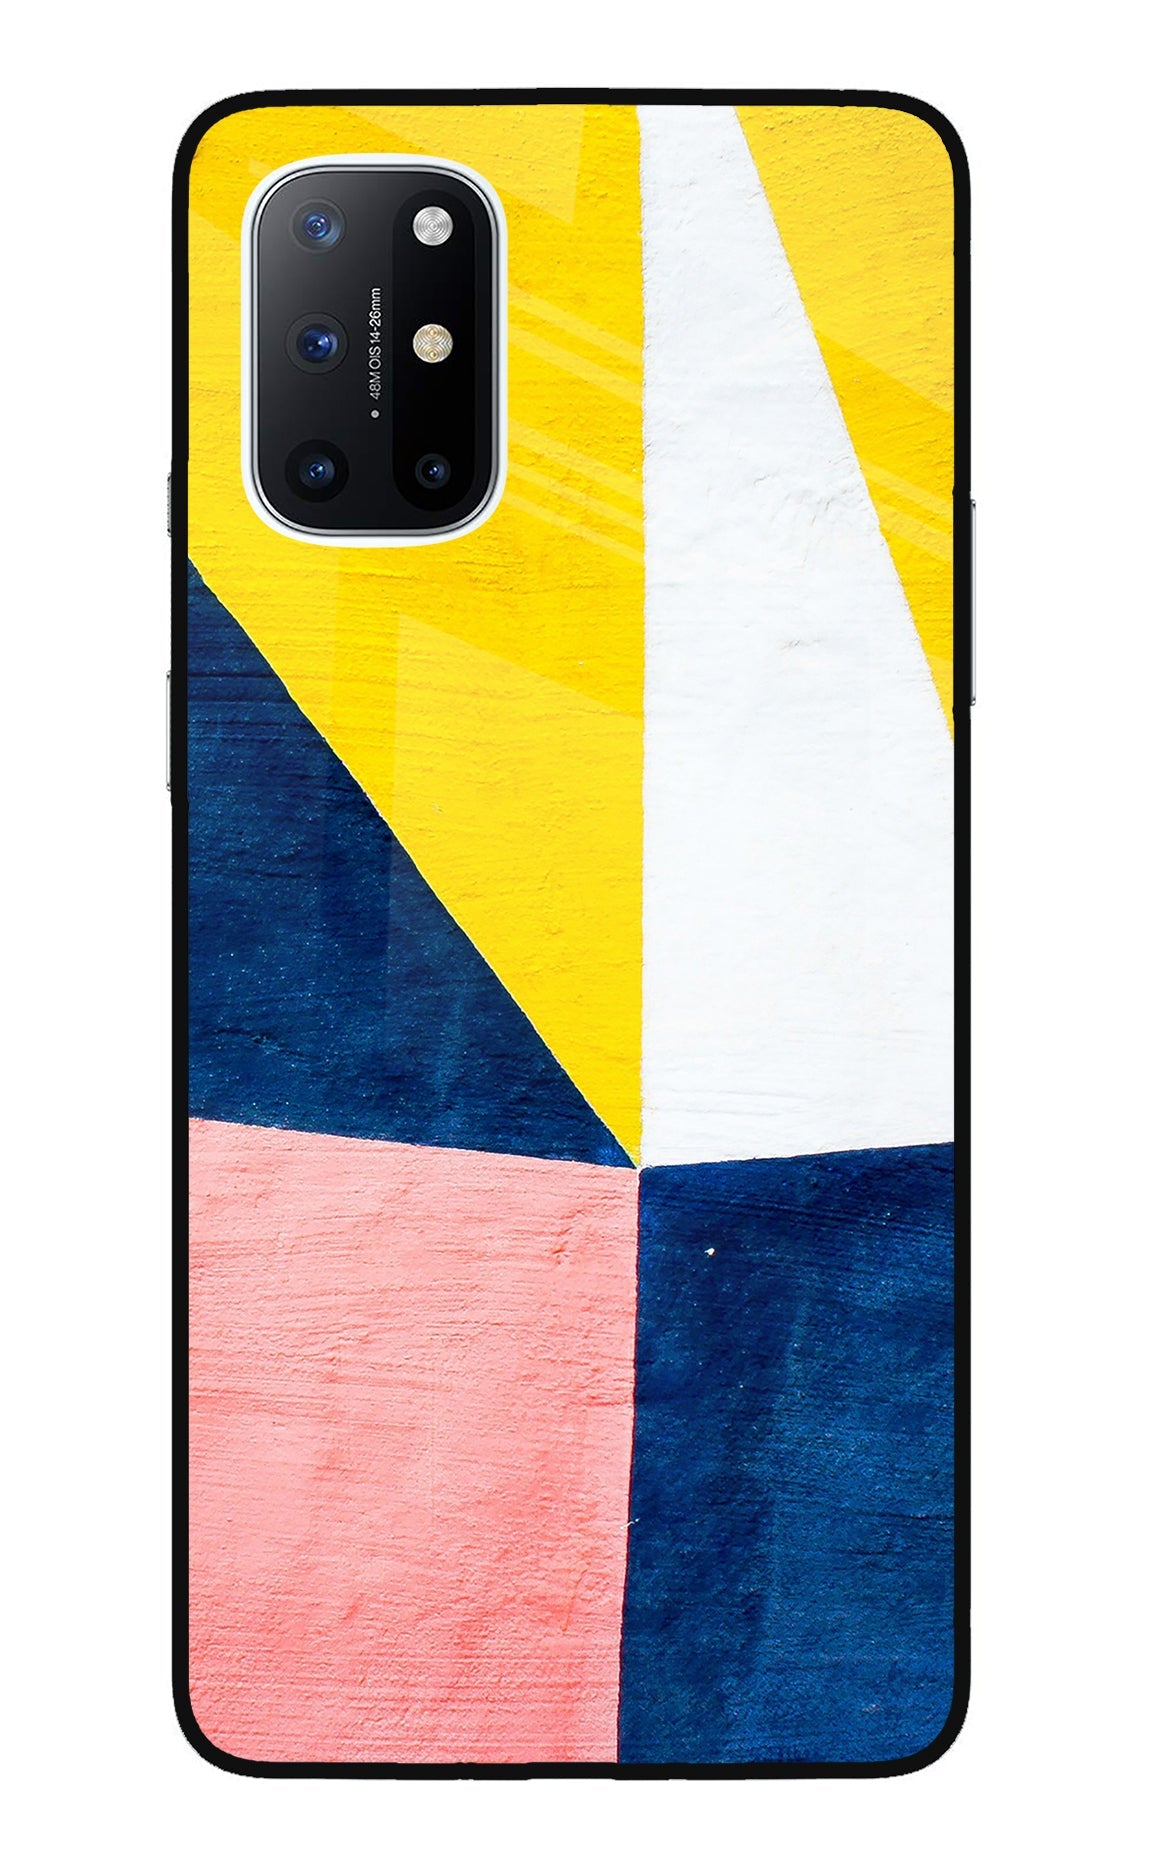 Colourful Art Oneplus 8T Glass Case